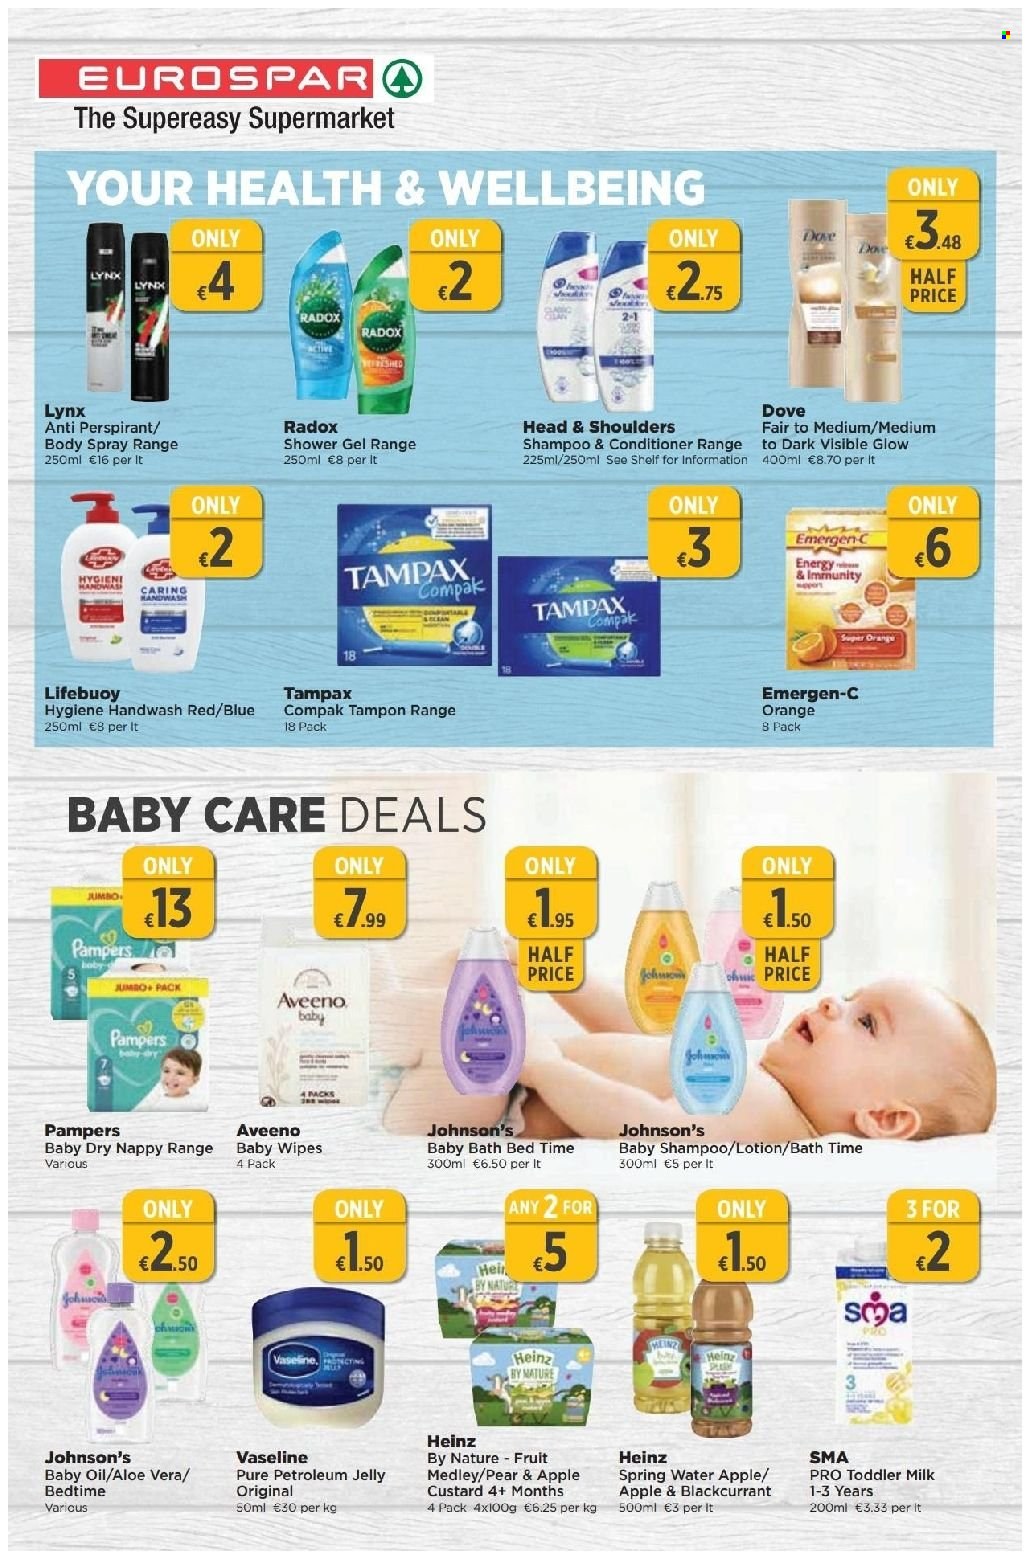 thumbnail - EUROSPAR offer  - 26.05.2022 - 15.06.2022 - Sales products - oranges, custard, milk, Heinz, oil, spring water, wipes, Pampers, baby wipes, nappies, Johnson's, Aveeno, baby bath, petroleum jelly, baby oil, Dove, shampoo, shower gel, hand wash, Radox, Vaseline, Lifebuoy, Tampax, tampons, conditioner, Head & Shoulders, body lotion, body spray, Emergen-C. Page 14.